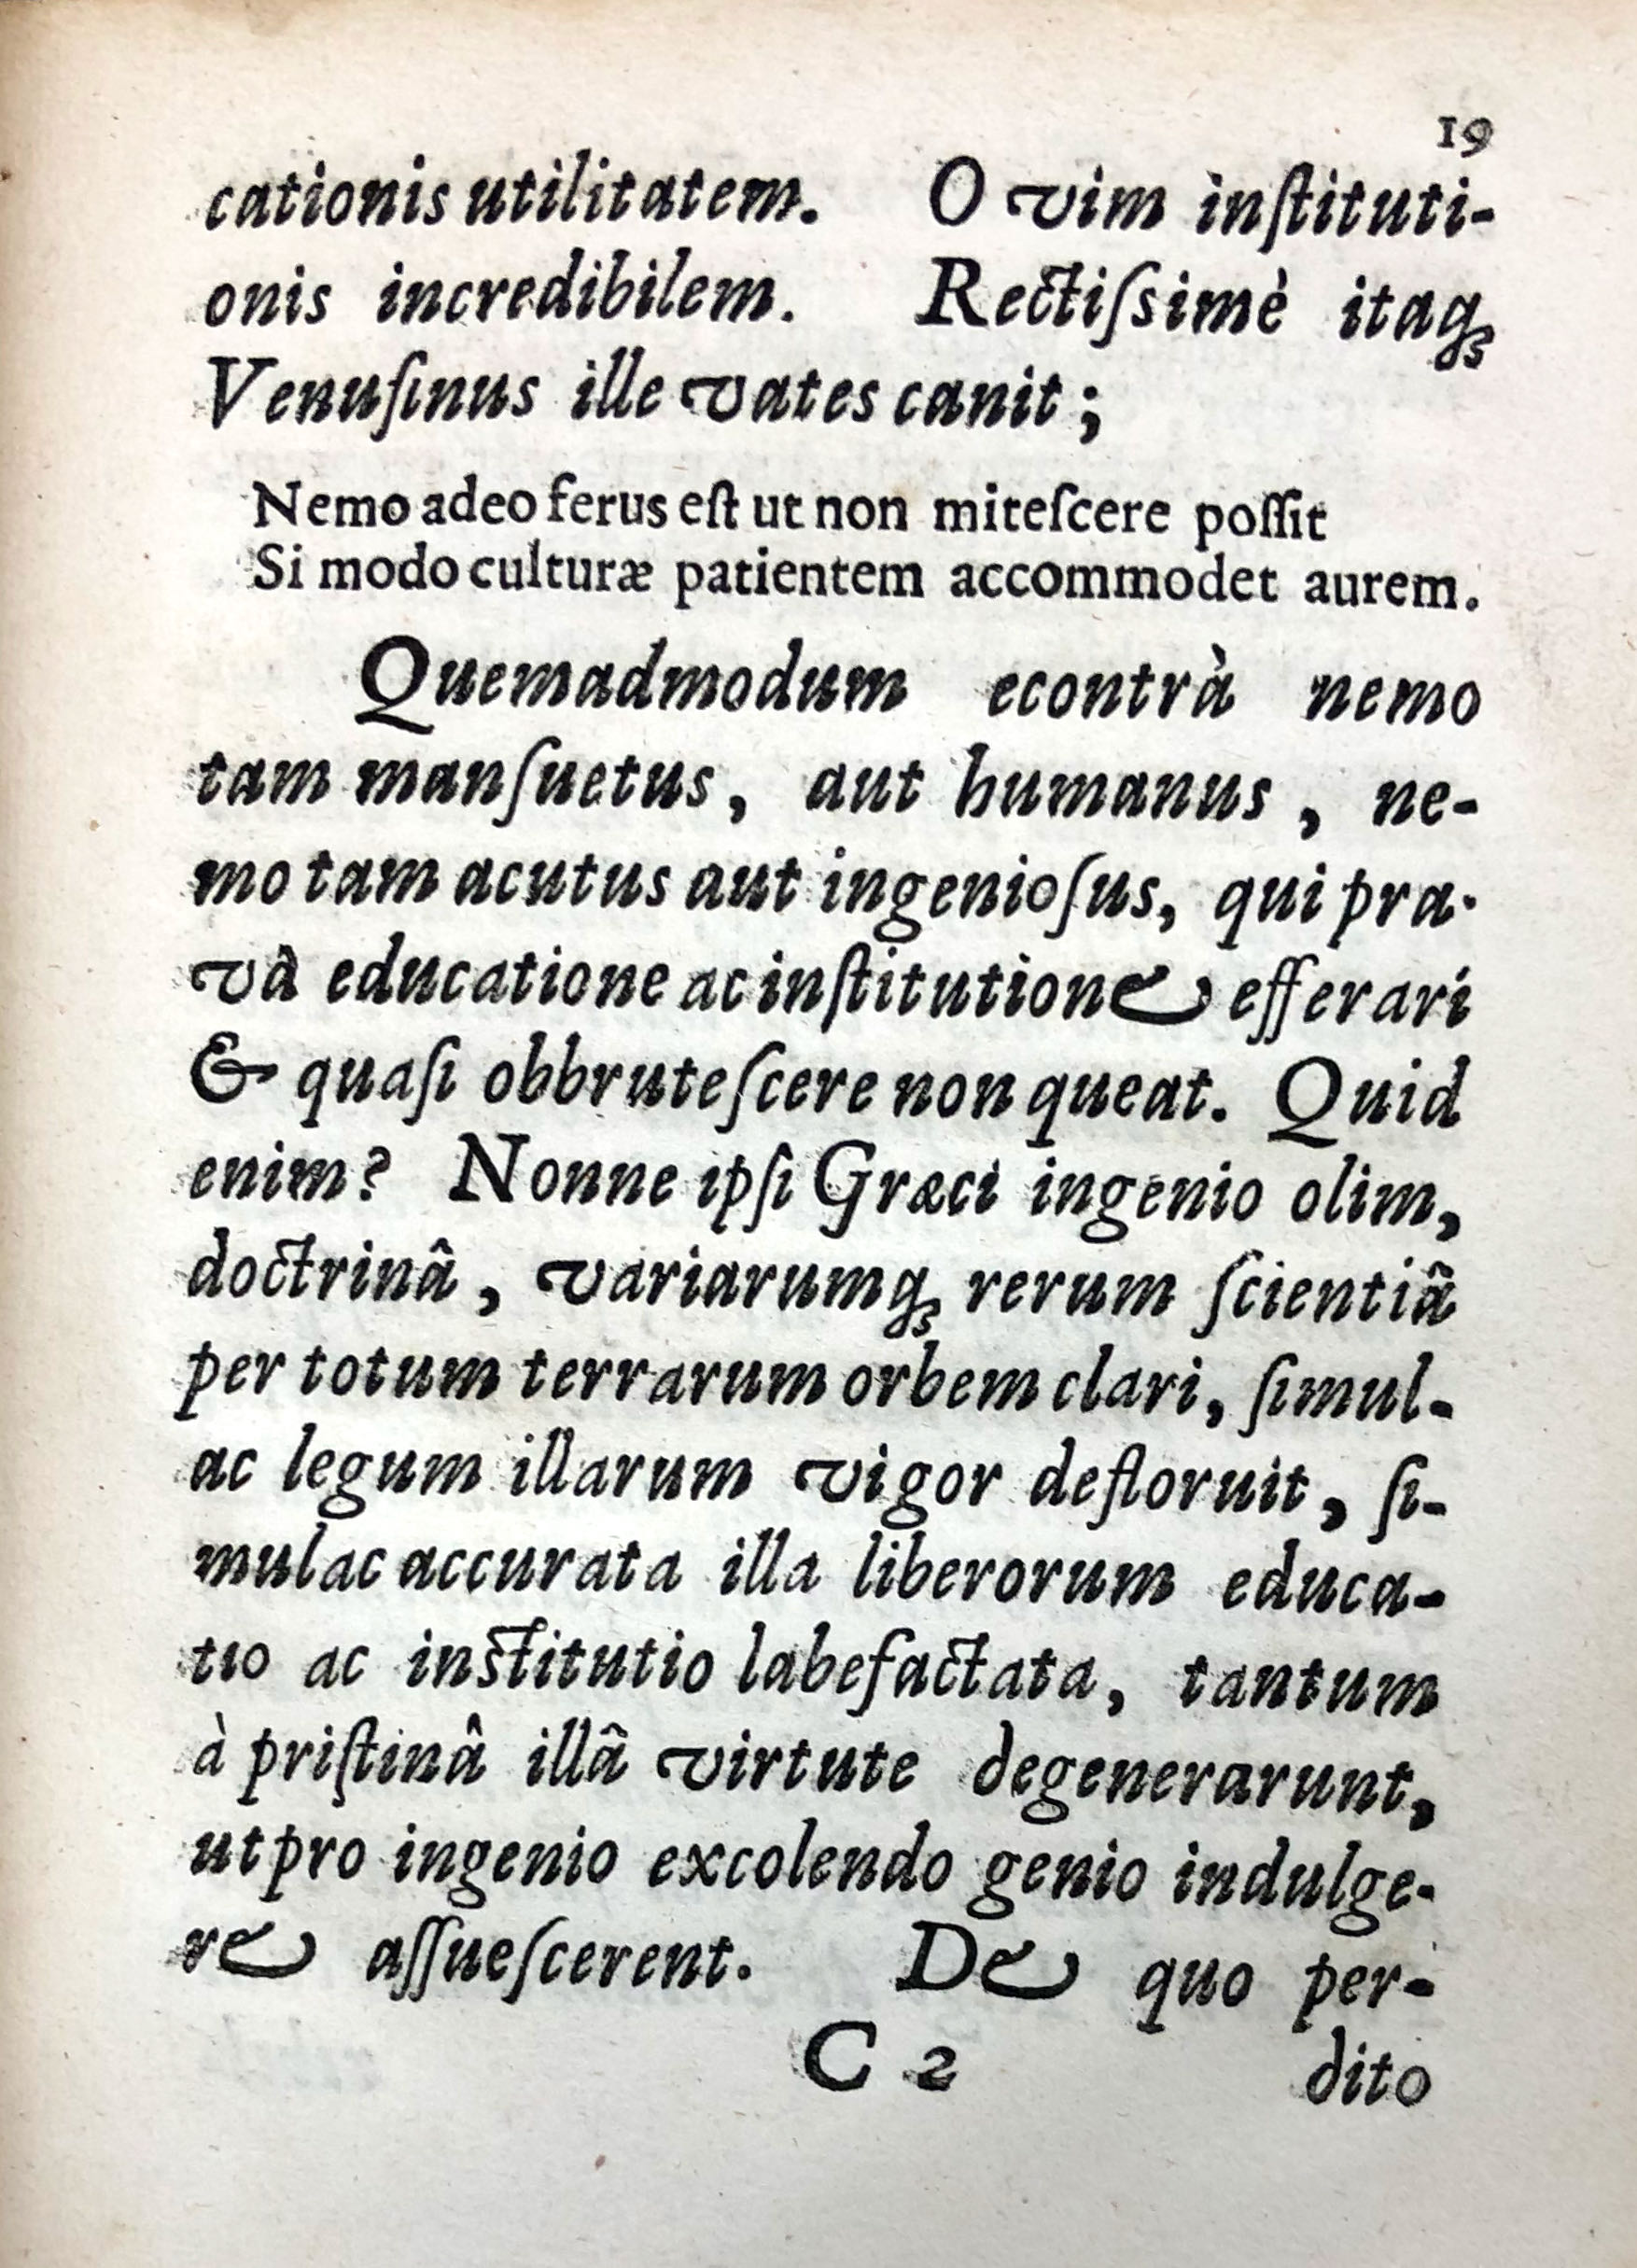 The non-italicized words in Johannes’ speech are a quotation from Horace.